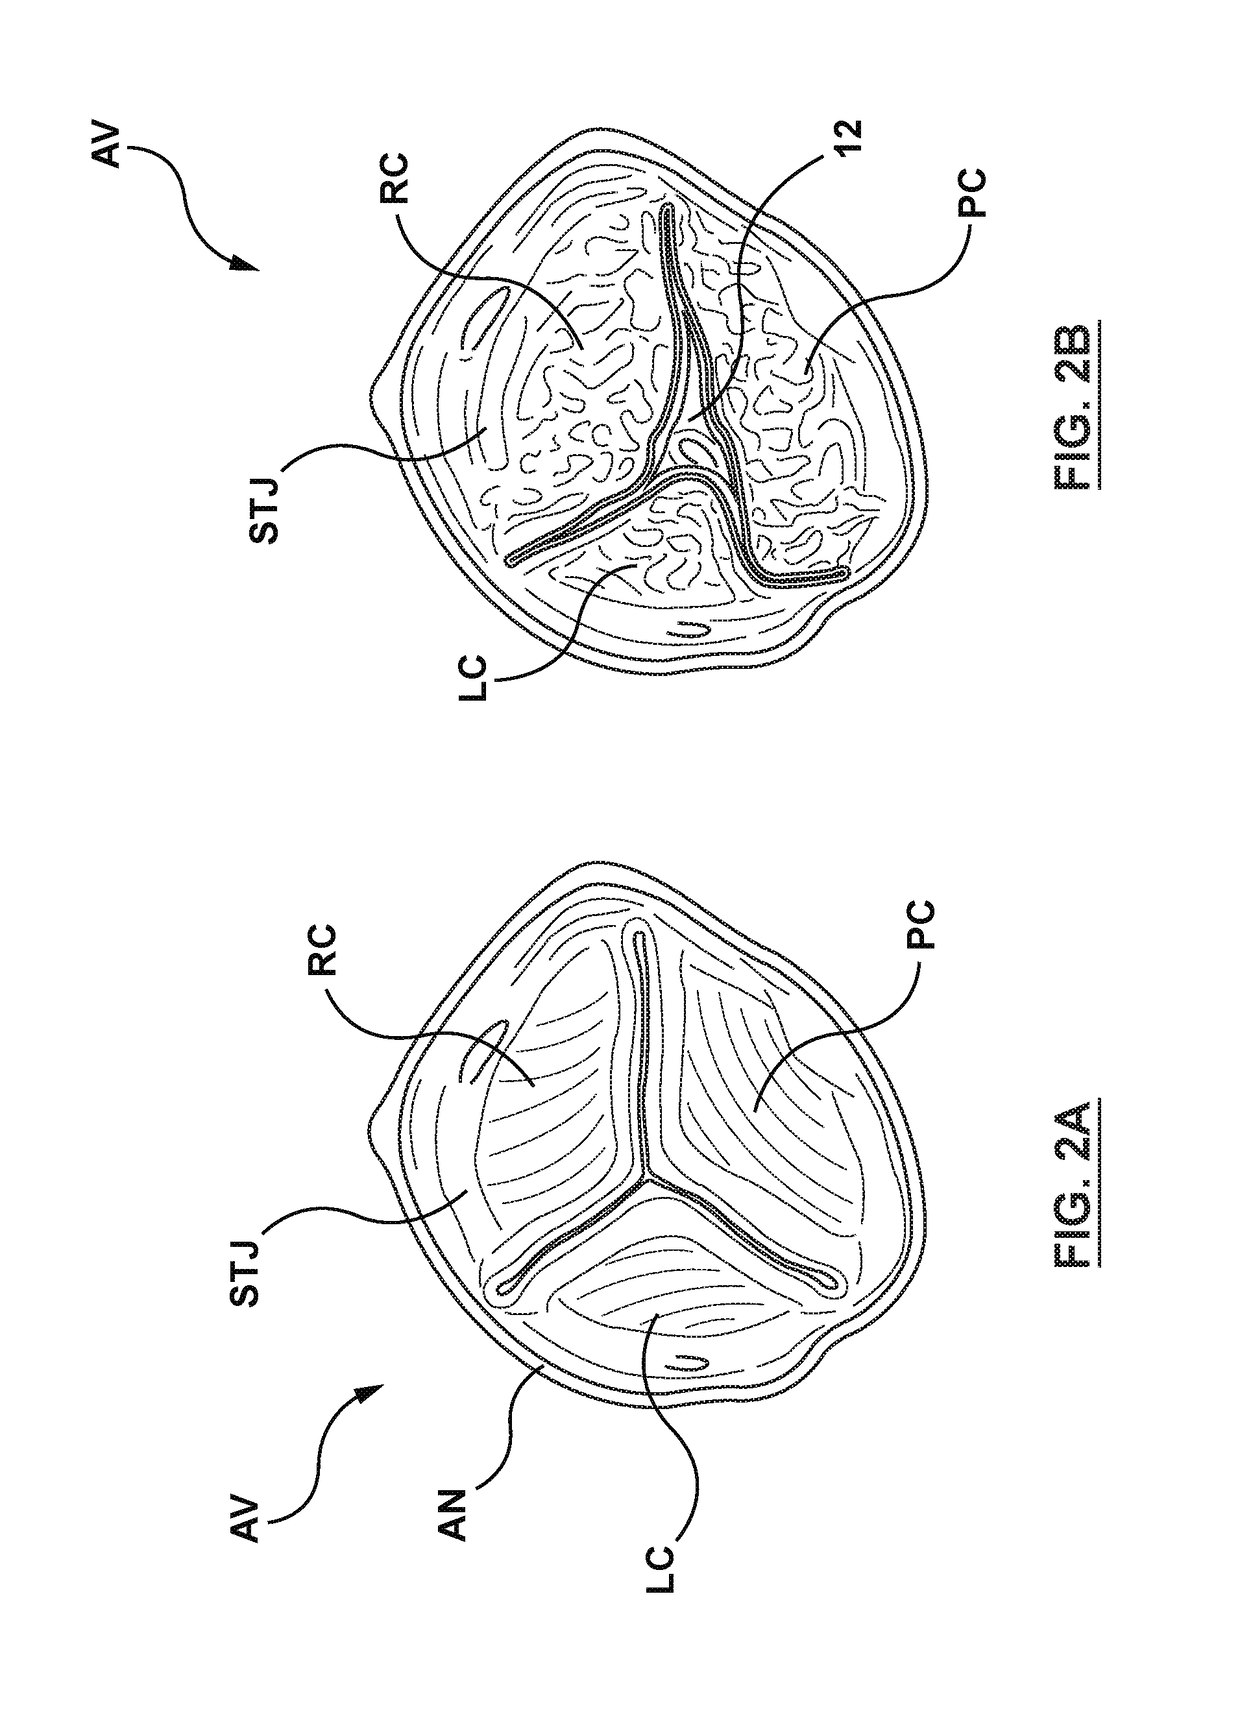 Transcatheter guidewire delivery systems, catheter assemblies for guidewire delivery, and methods for percutaneous guidewire delivery across heart valves